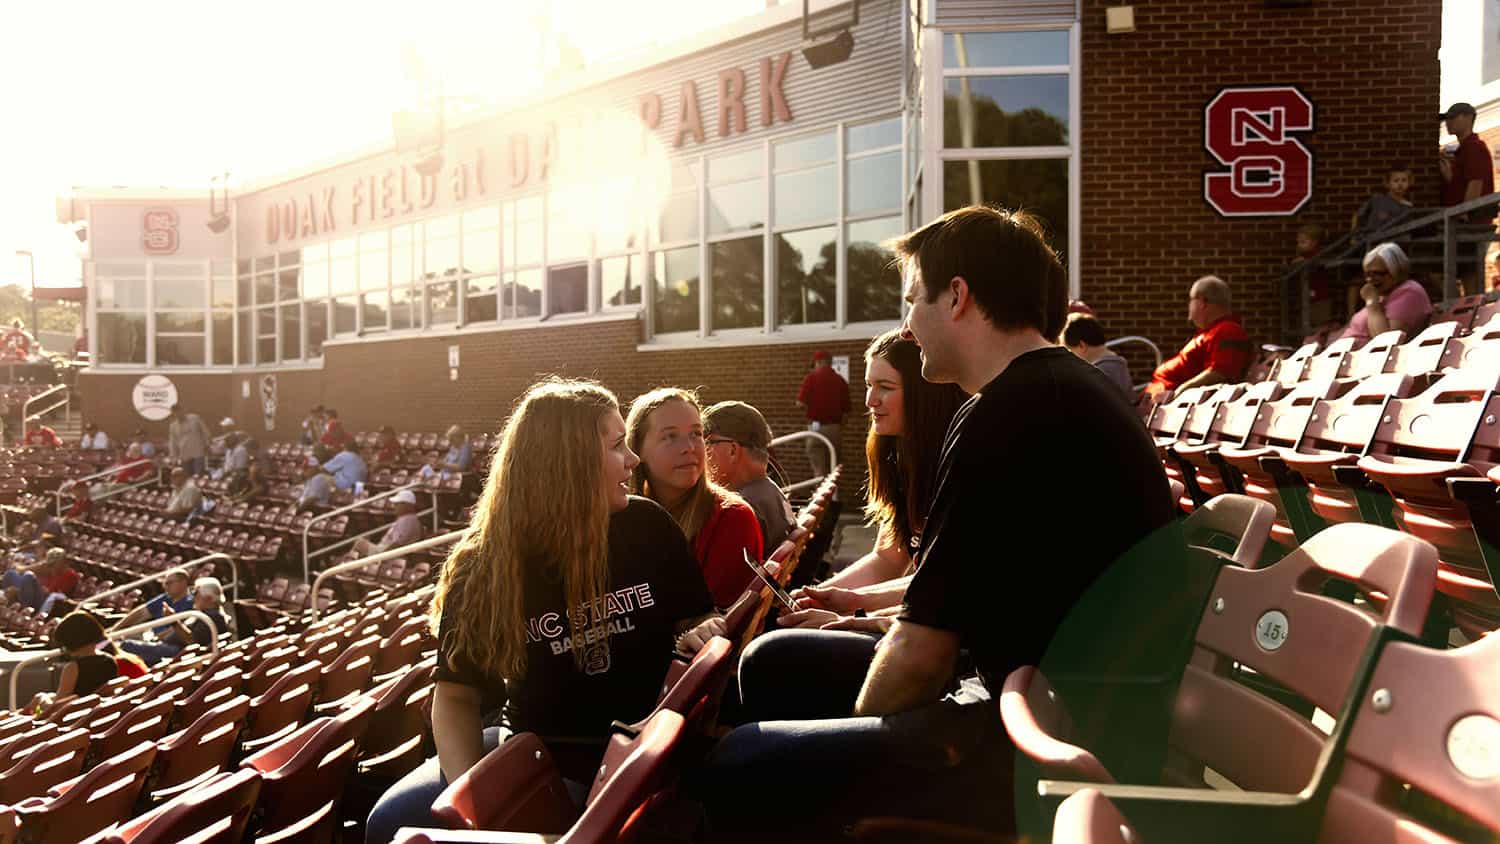 Students collaborating around laptop in baseball stadium stands